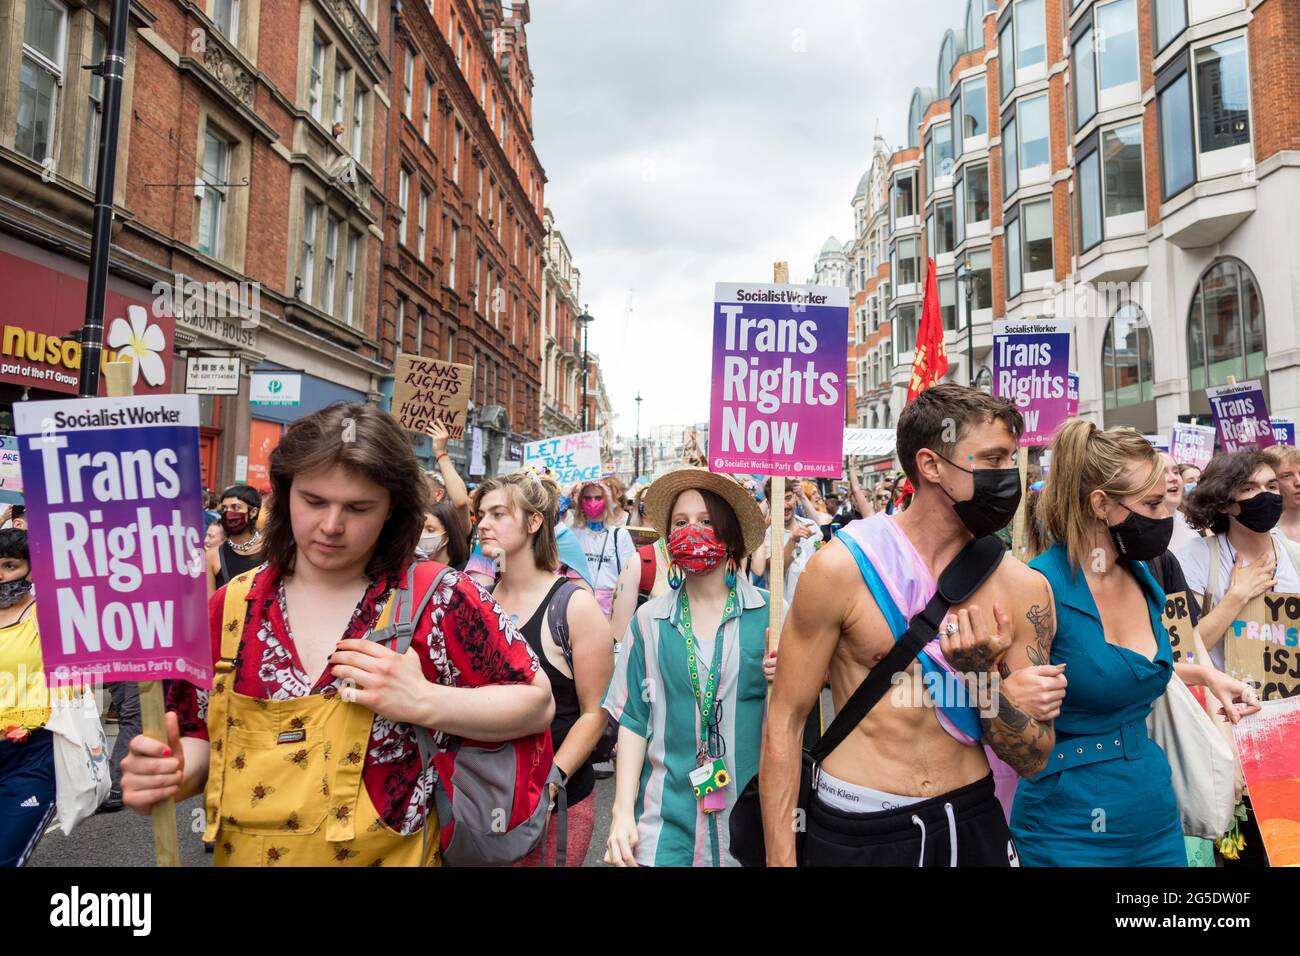 London, UK. 26th June, 2021. Protestors seen along Soho with placards expressing their opinion, during the march.The Transgender Pride rally were coordinated by Socialist Workers, calling for protection of the rights of transgender people in the UK. The march took place in Leicester Square. Credit: SOPA Images Limited/Alamy Live News Stock Photo